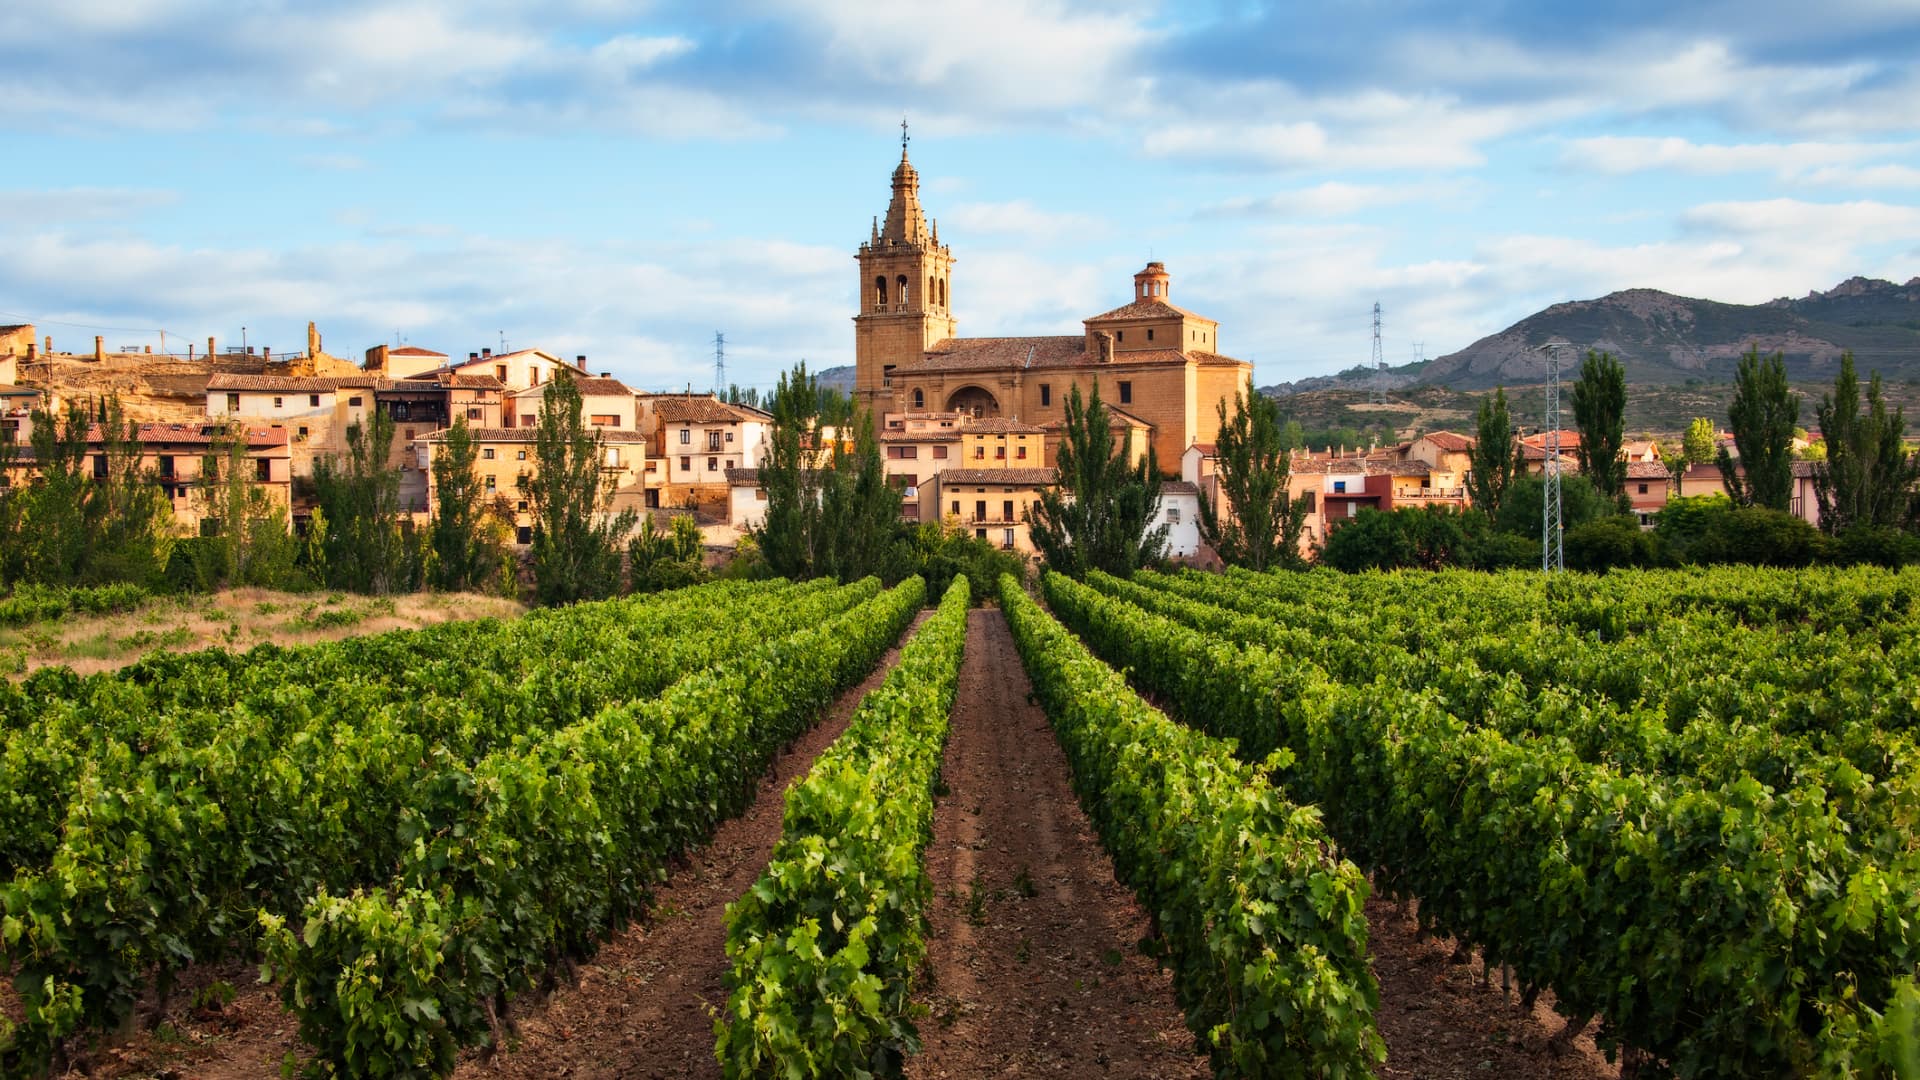 The village of Brinas in the La Rioja region in northern Spain. The area has more than 500 wineries, around 80 of which welcome visitors.